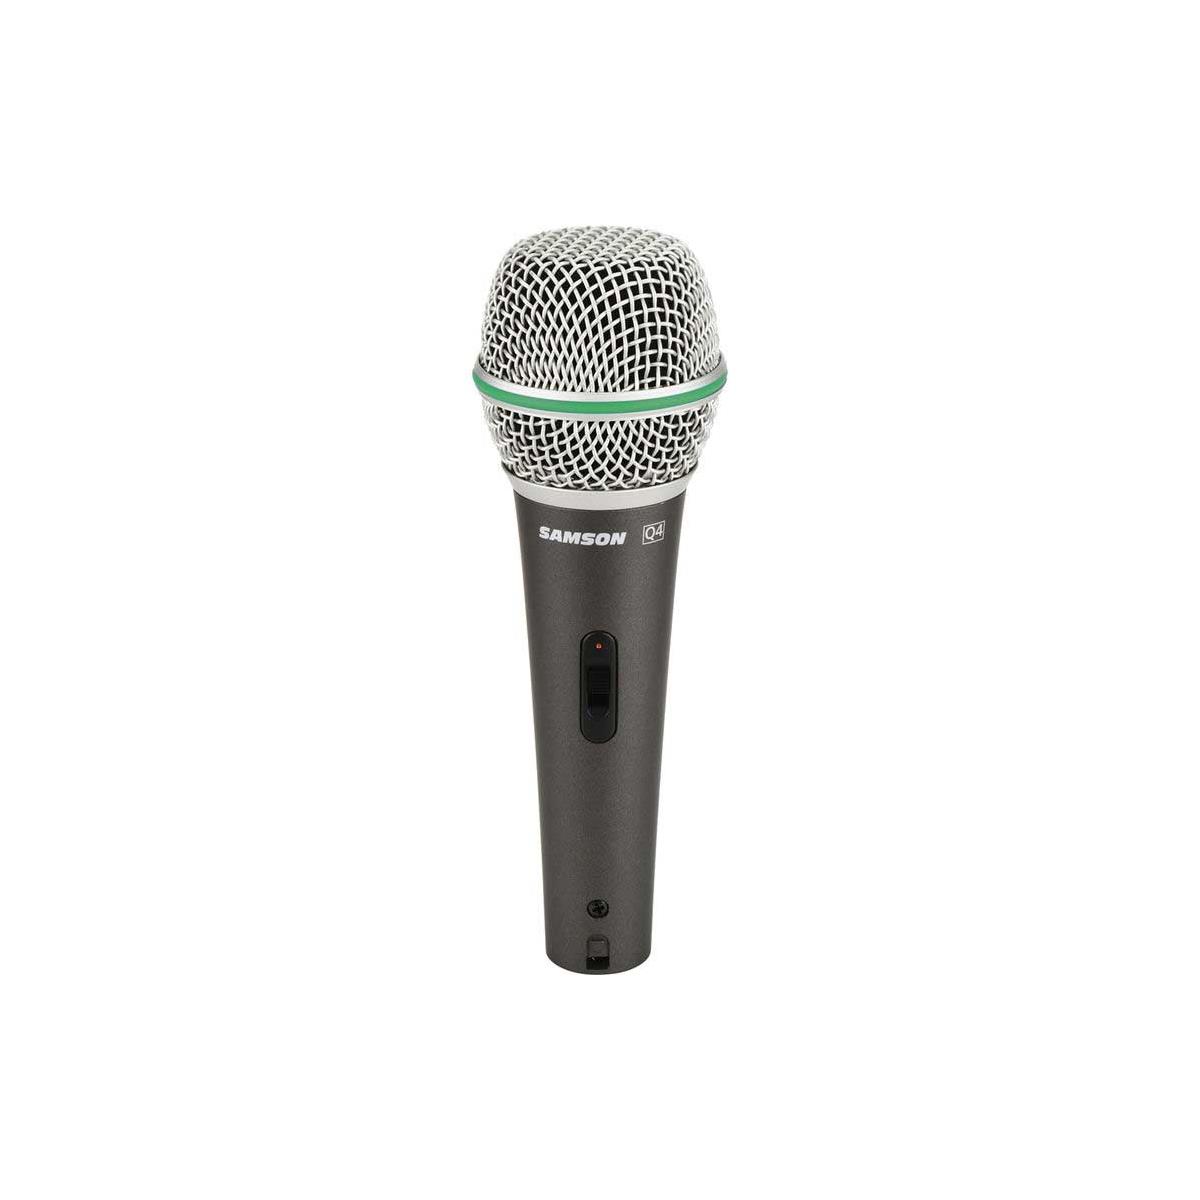 Image of Samson Q4 Dynamic Supercardioid Handheld Microphone with On/Off Switch